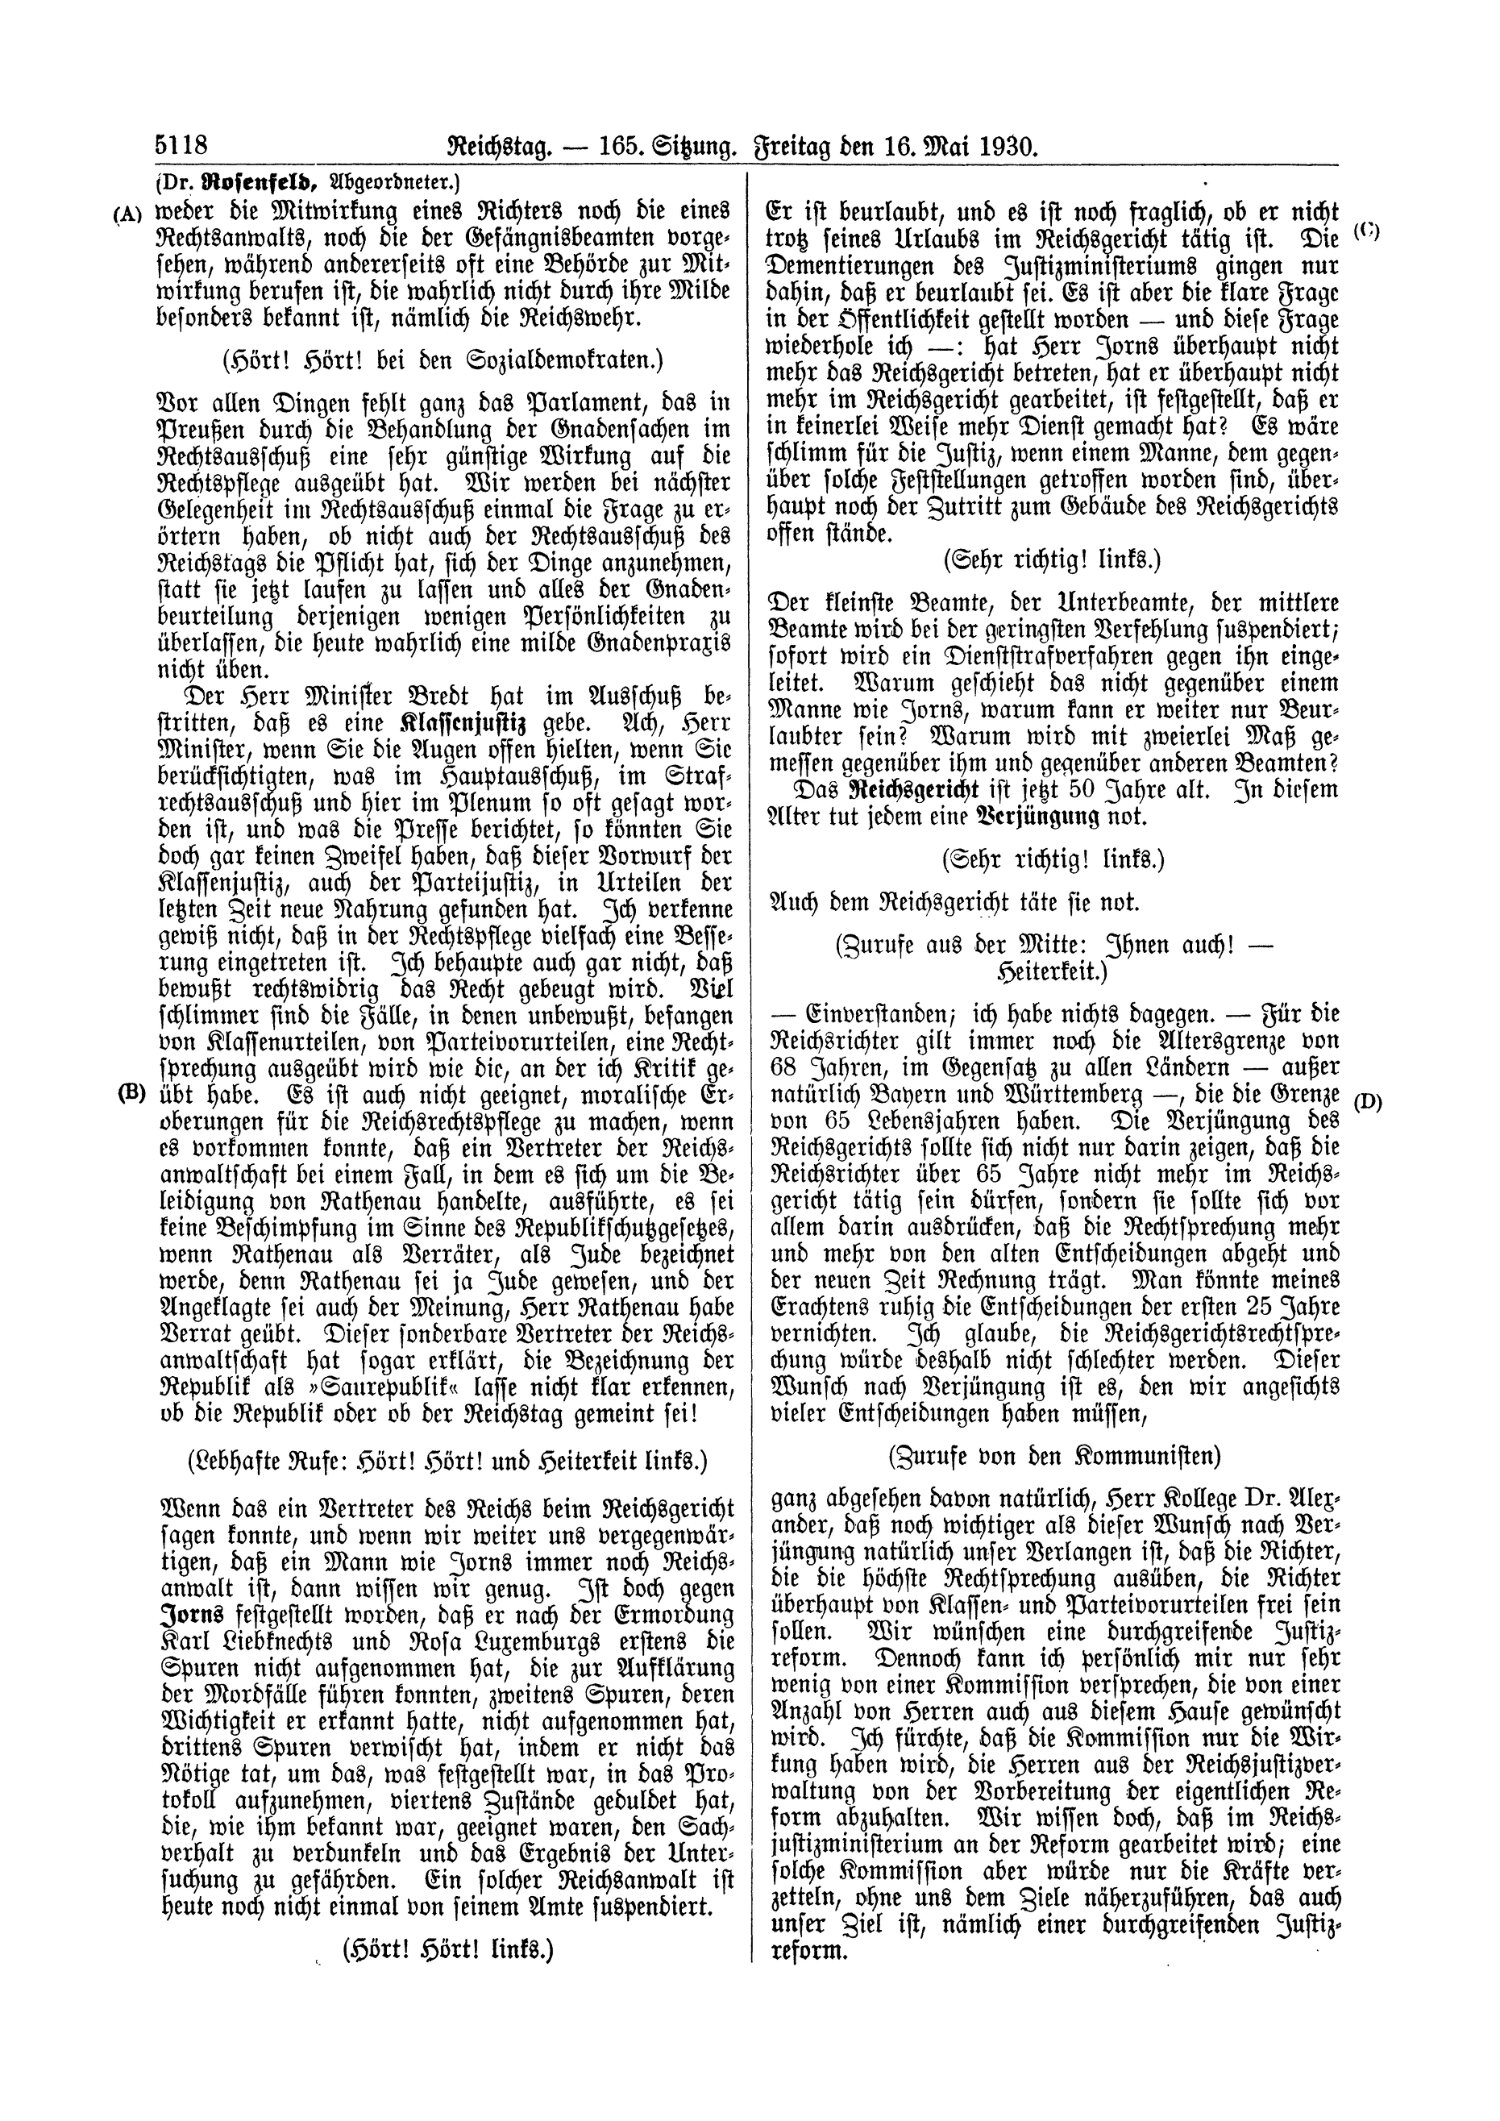 Scan of page 5118